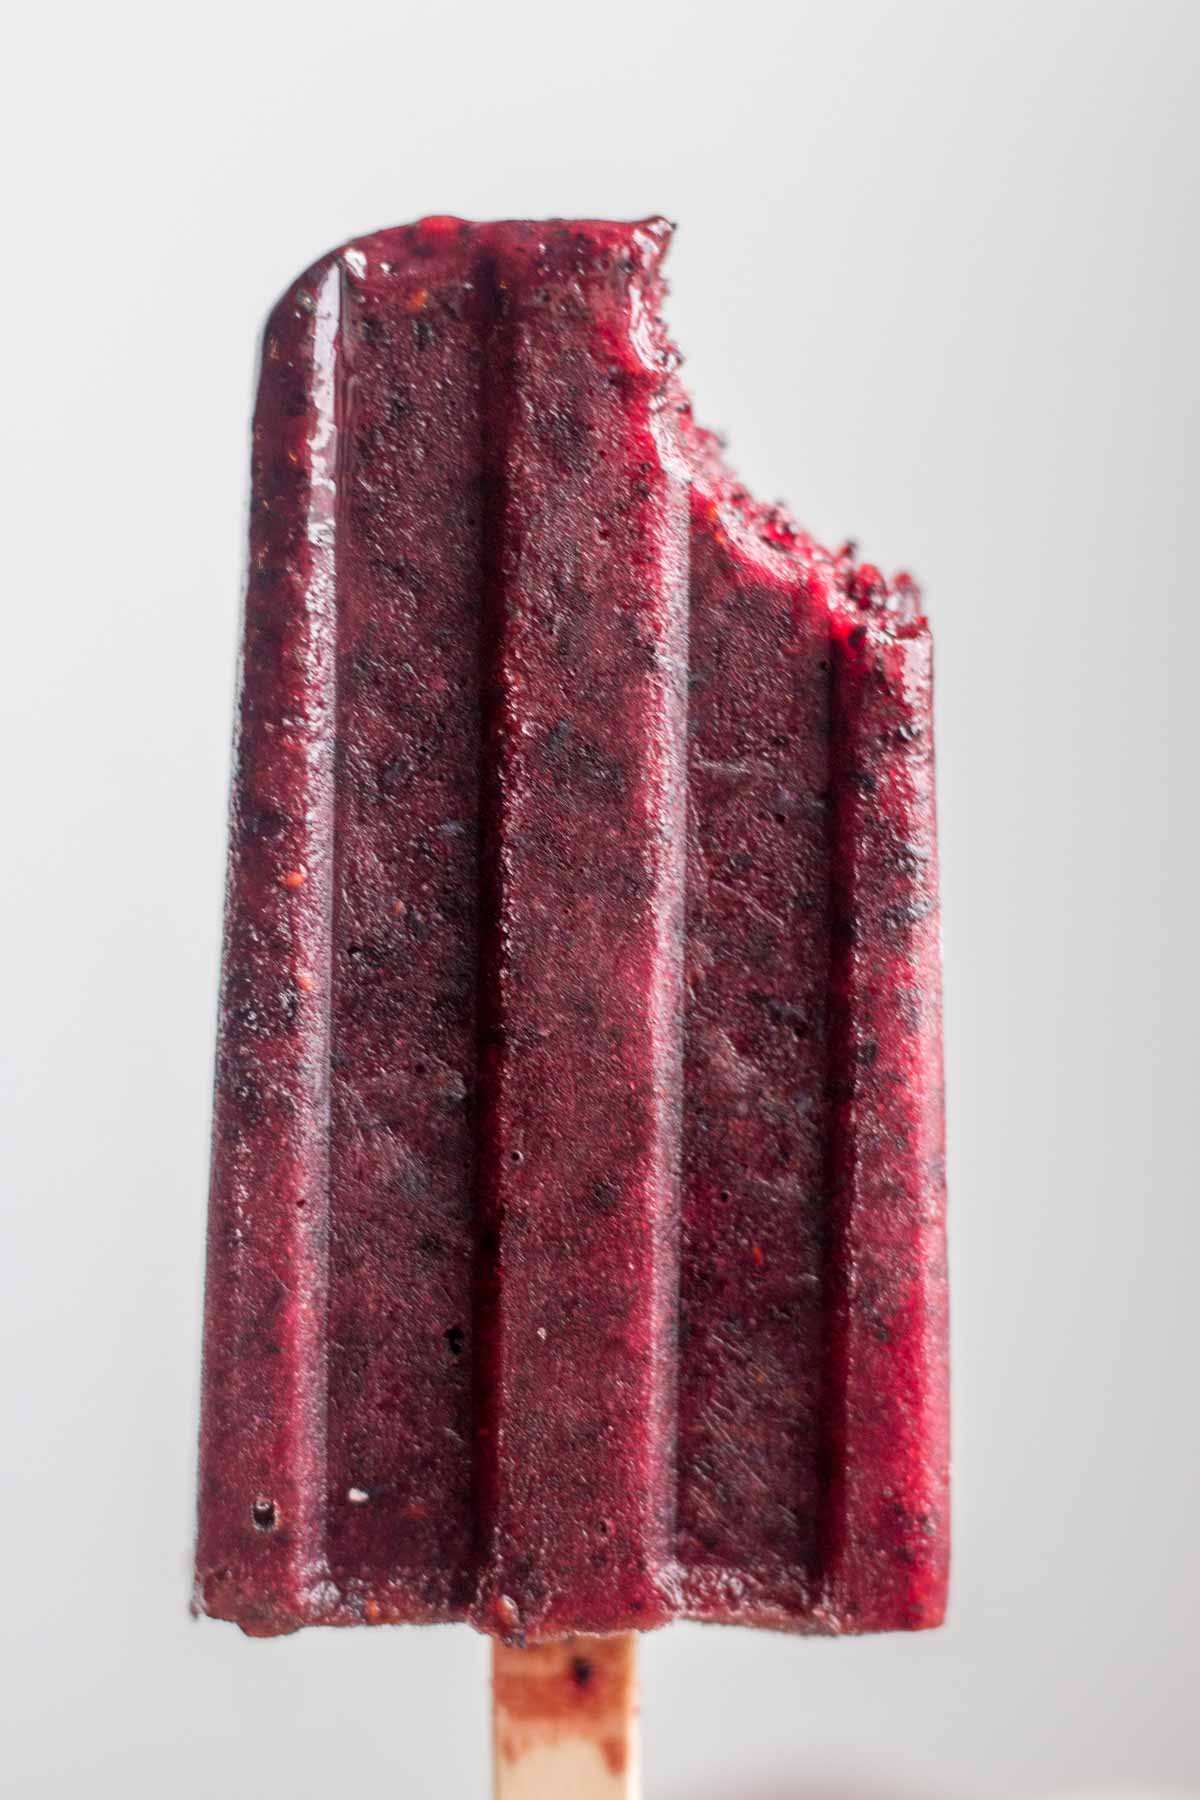 Close up of a blueberry and basil popsicle with a bite taken out of it. 